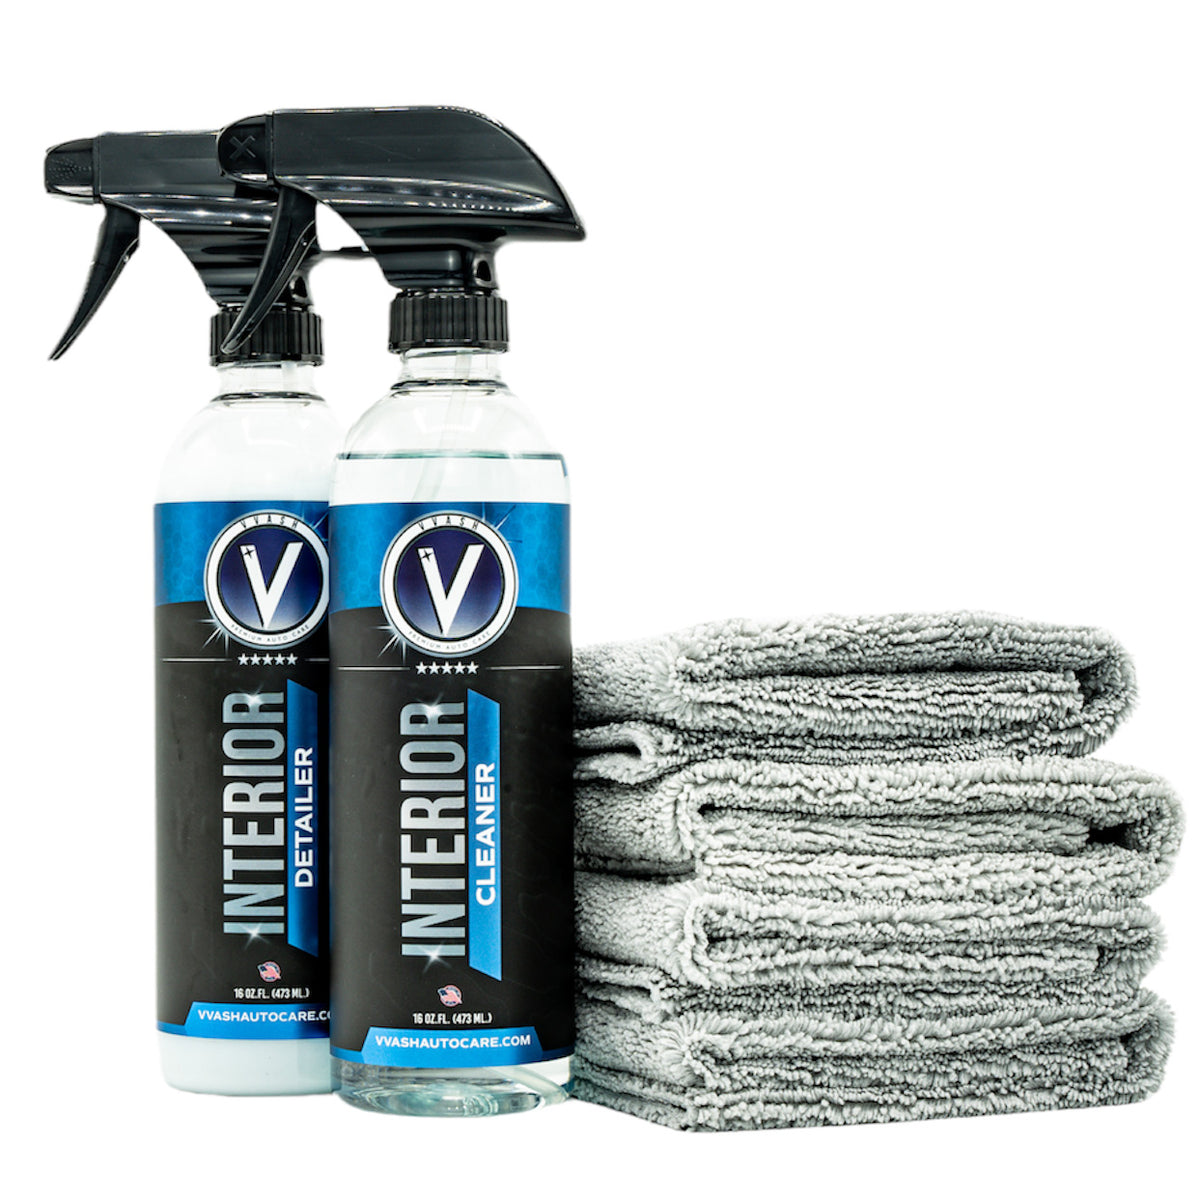 Car Detailing Supplies: For Car Enthusiasts by Car Enthusiasts – Vvash Auto  Care